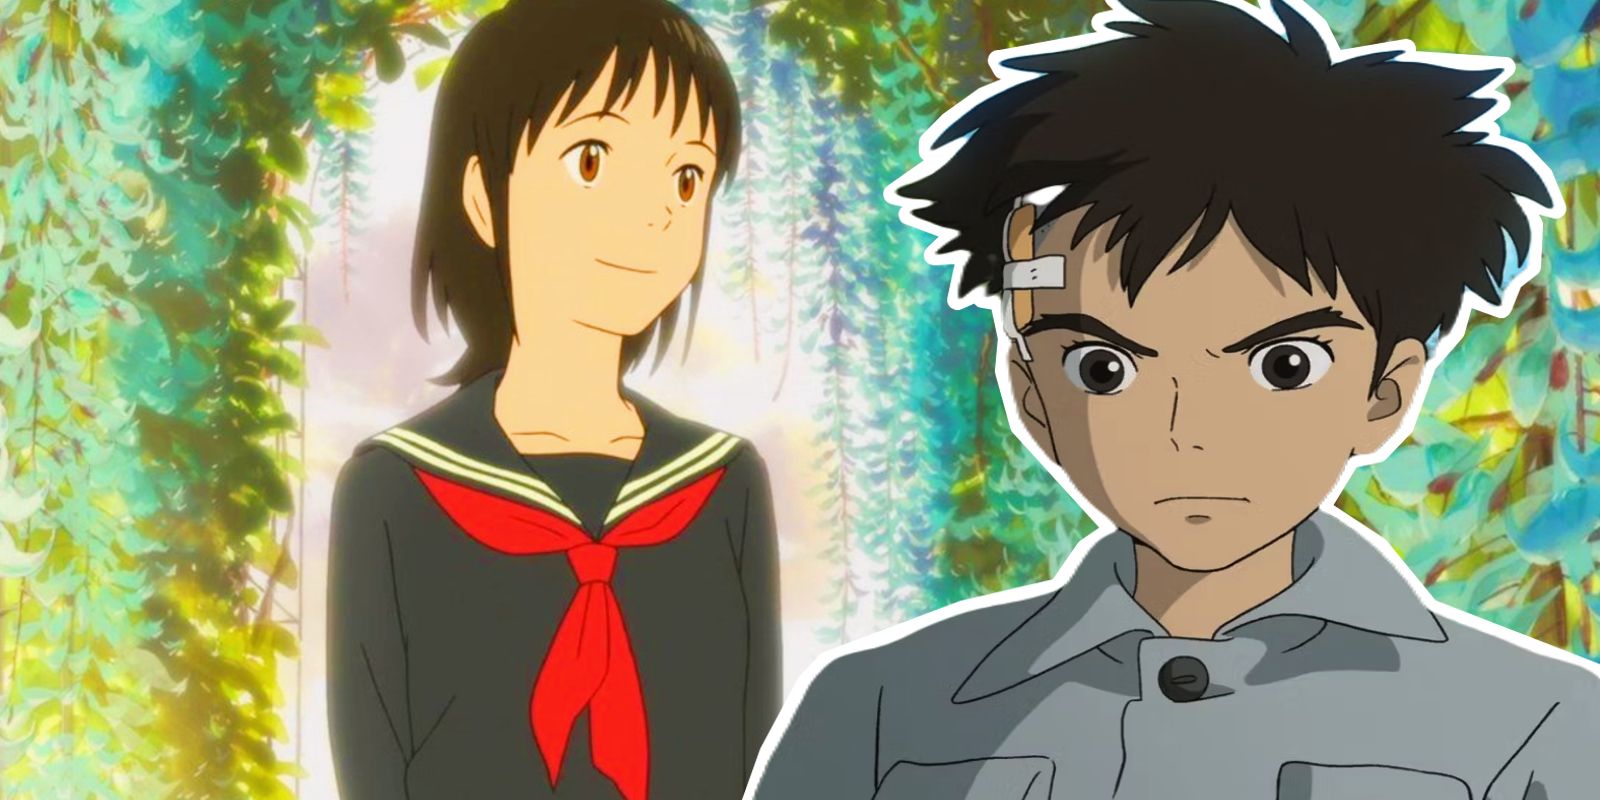 10 Anime Series For People Who Don't Like Anime